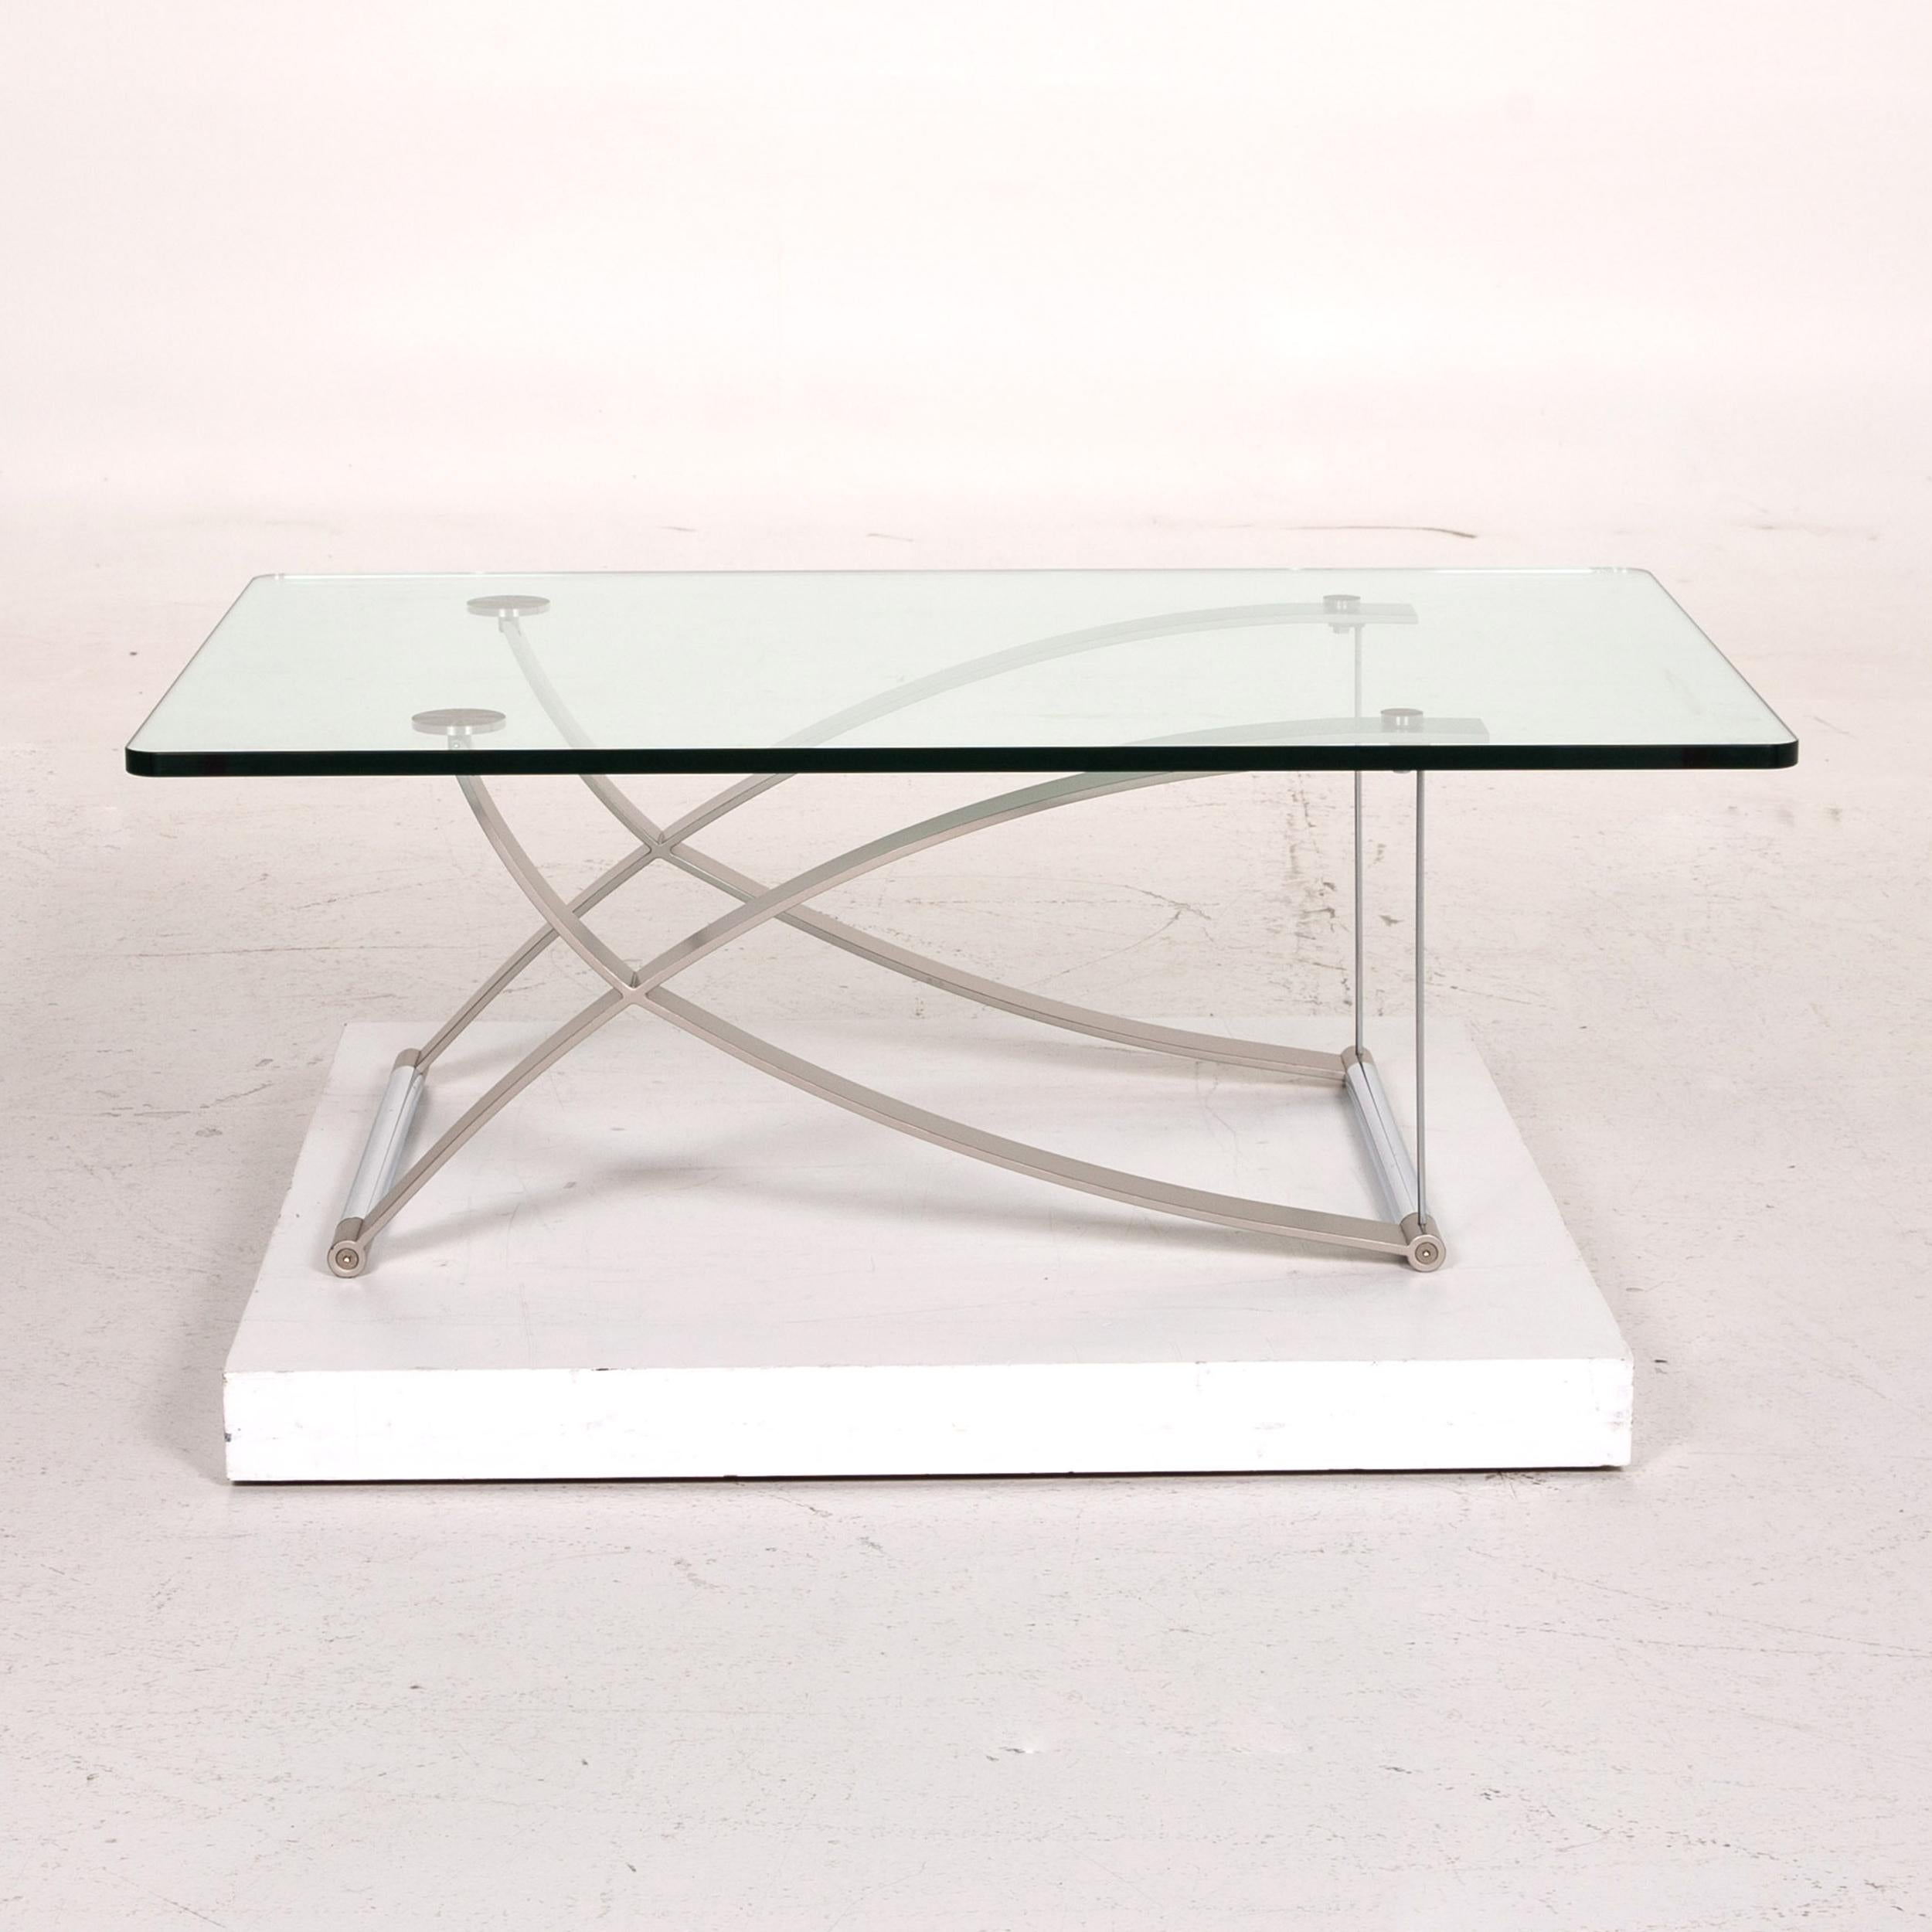 Rolf Benz RB 1150 Glass Coffee Table Metal Table 2